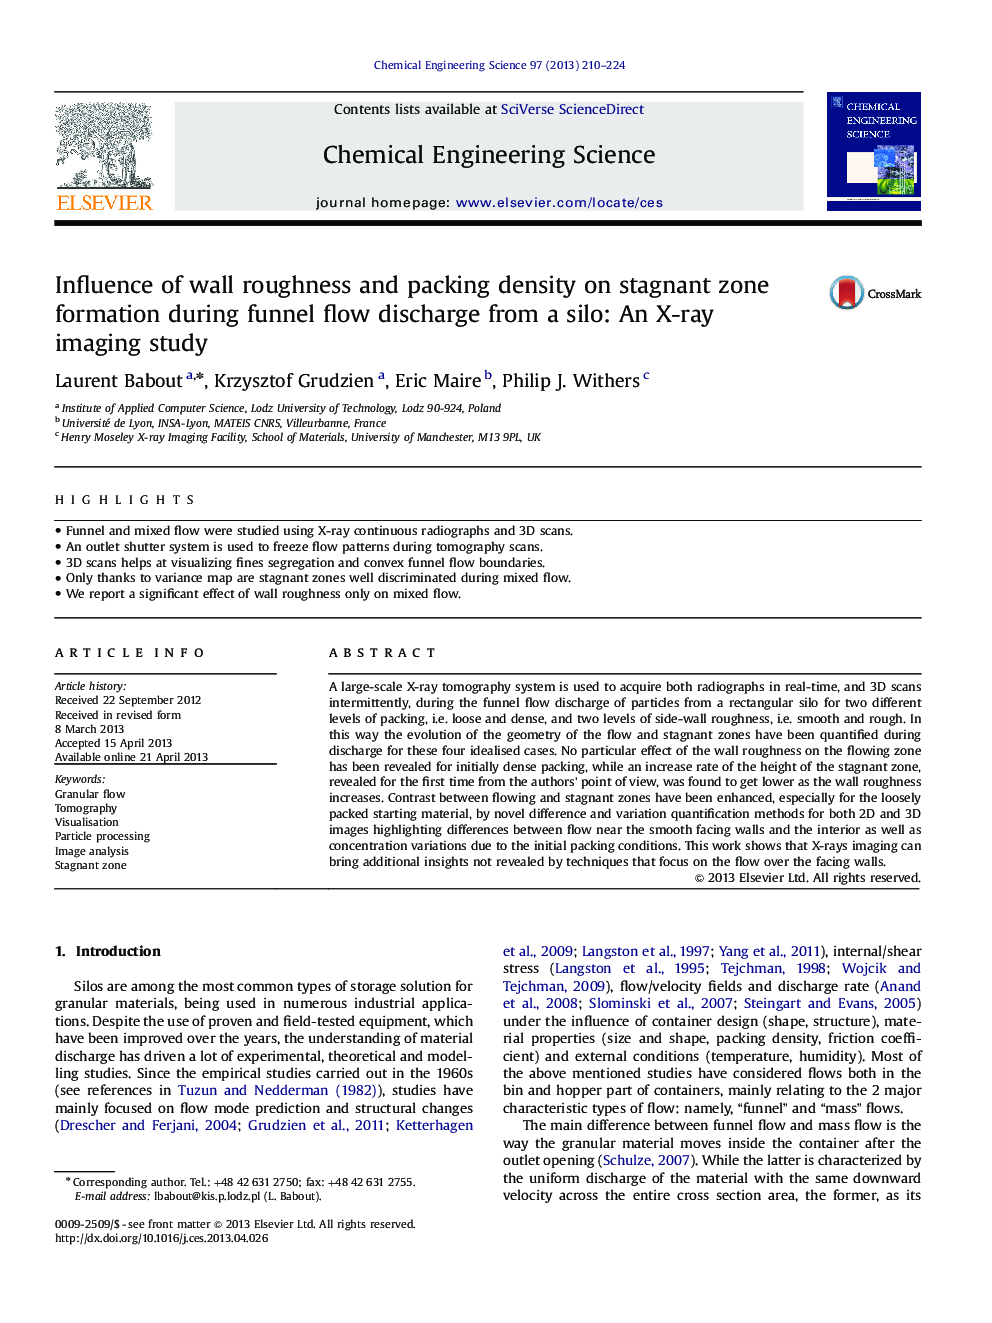 Influence of wall roughness and packing density on stagnant zone formation during funnel flow discharge from a silo: An X-ray imaging study